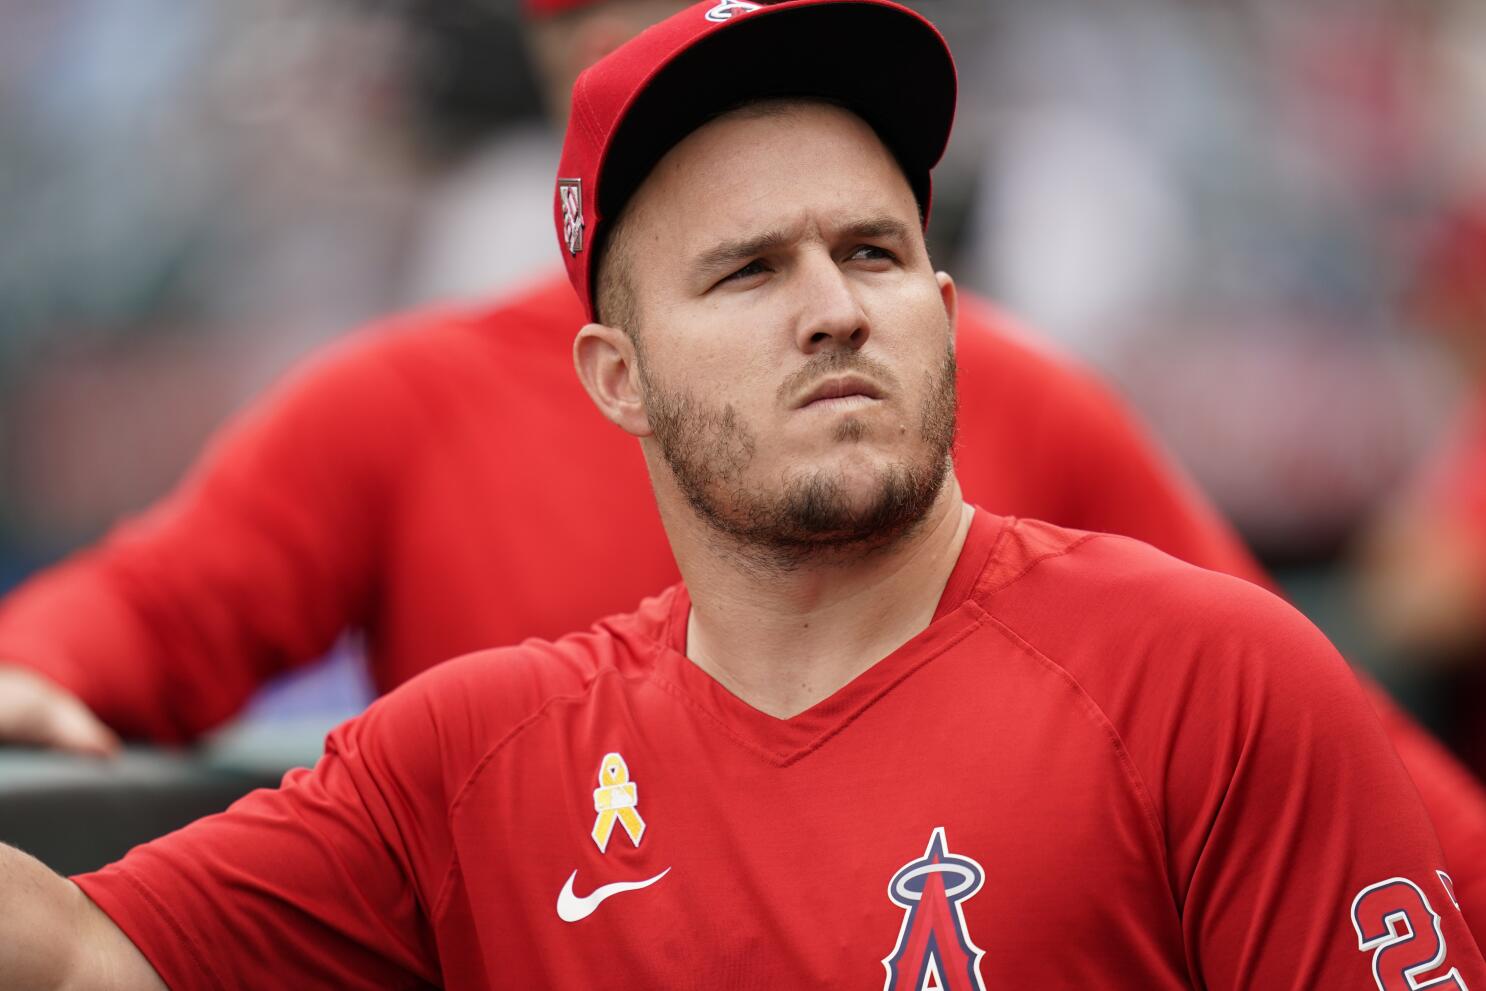 Mike Trout won't attend All-Star game while he recovers from